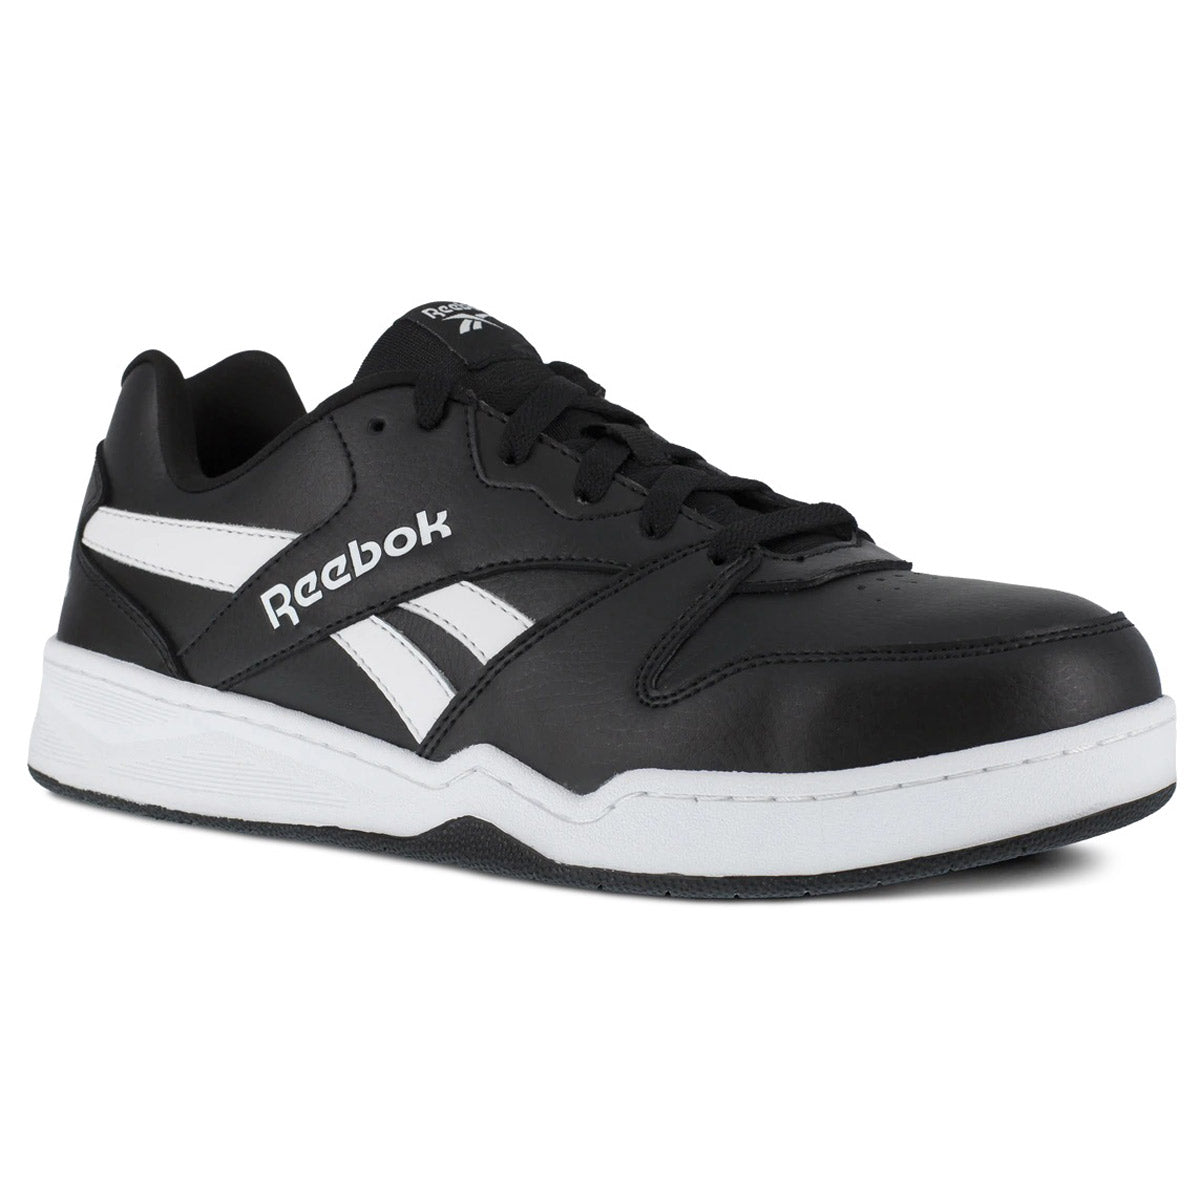 Black and white Reebok Work Composite Toe BB4500 Low athletic shoe on a white background.